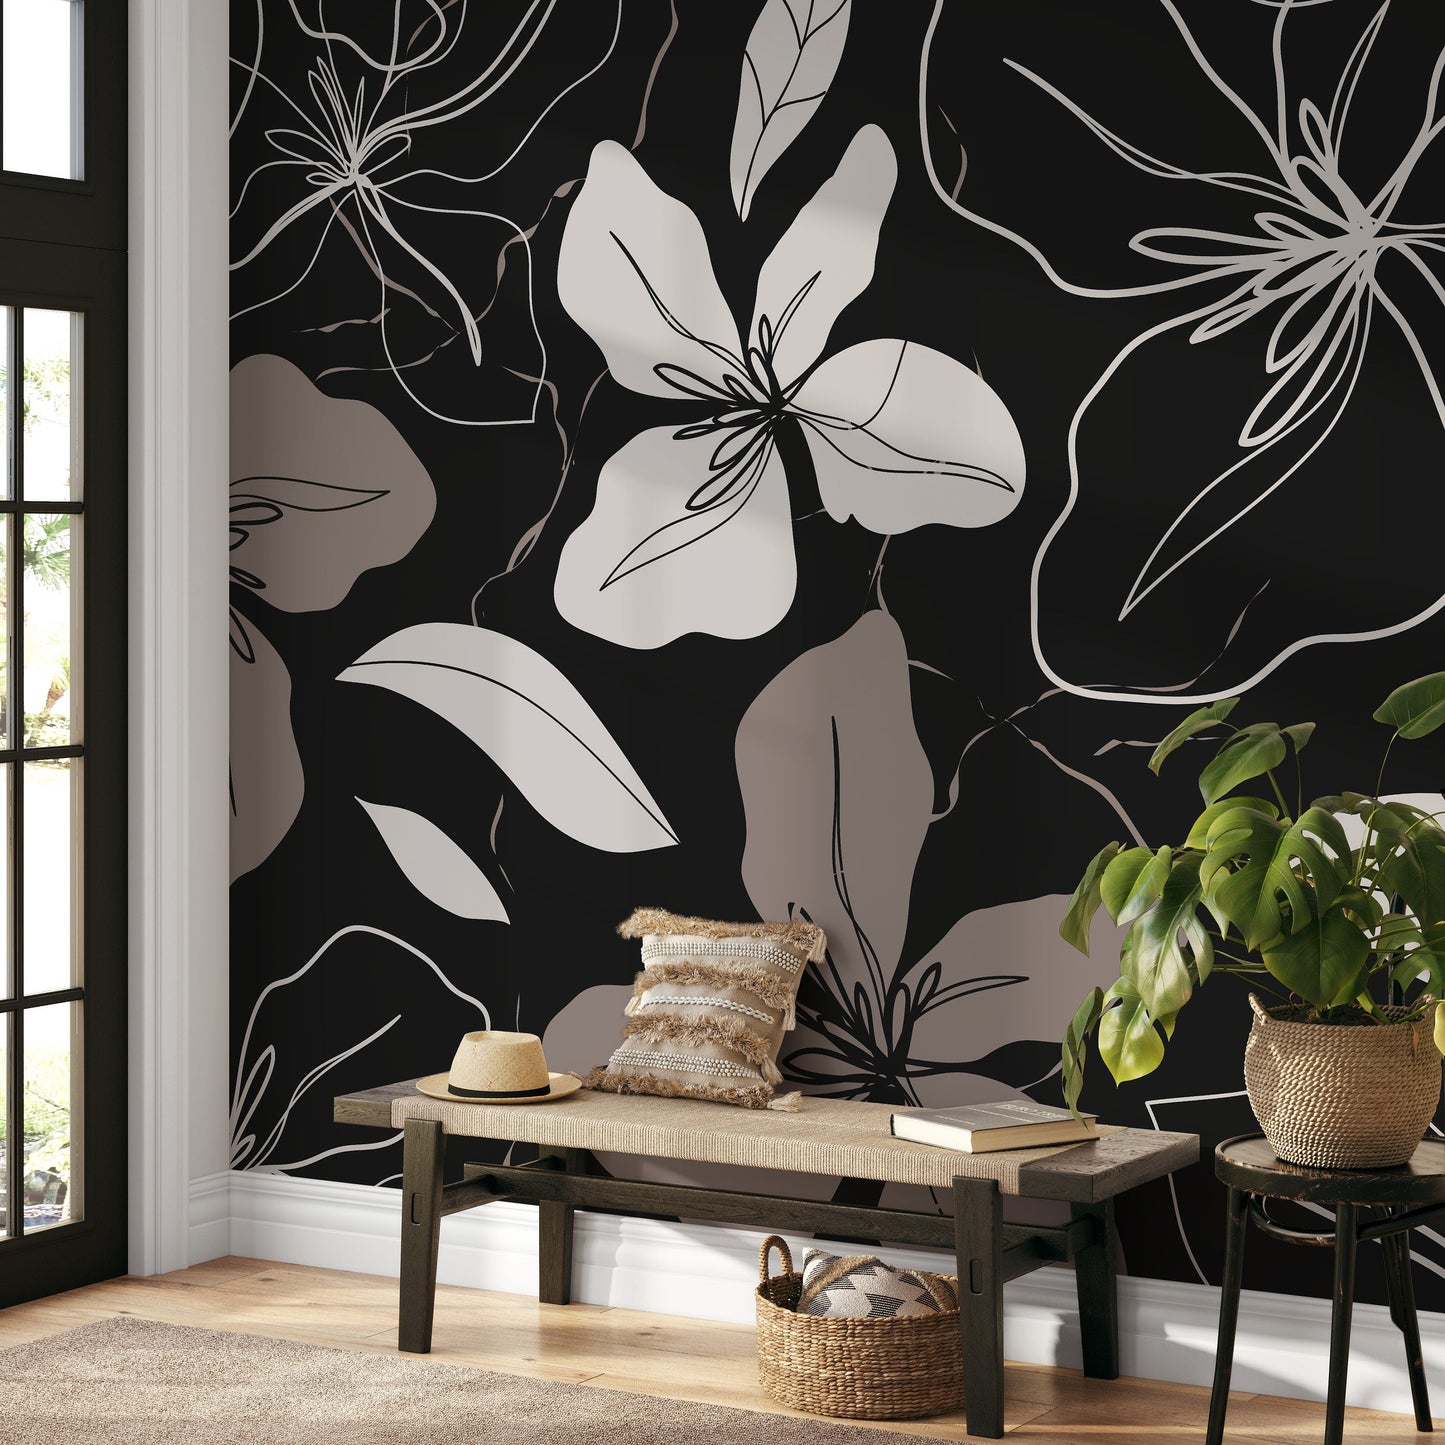 Abstract Floral Mural Wallpaper Peel and Stick and Traditional Wallpaper - C050